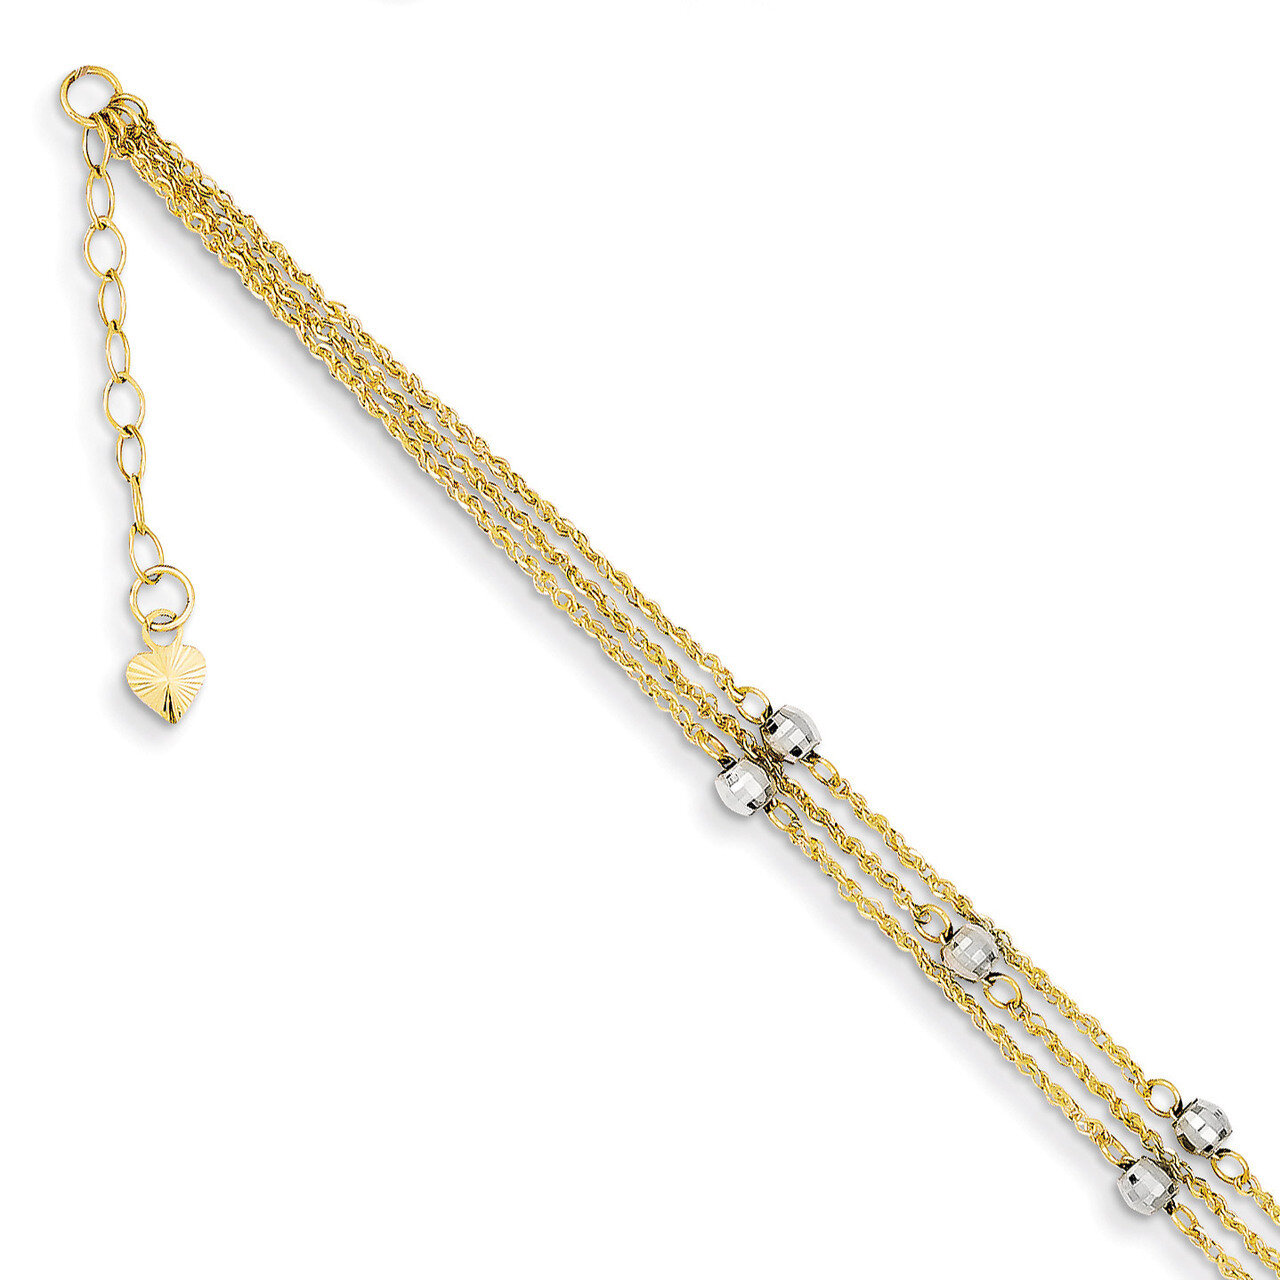 Triple Strand Anklet 9 Inch 14k Two-Tone Gold ANK194-9